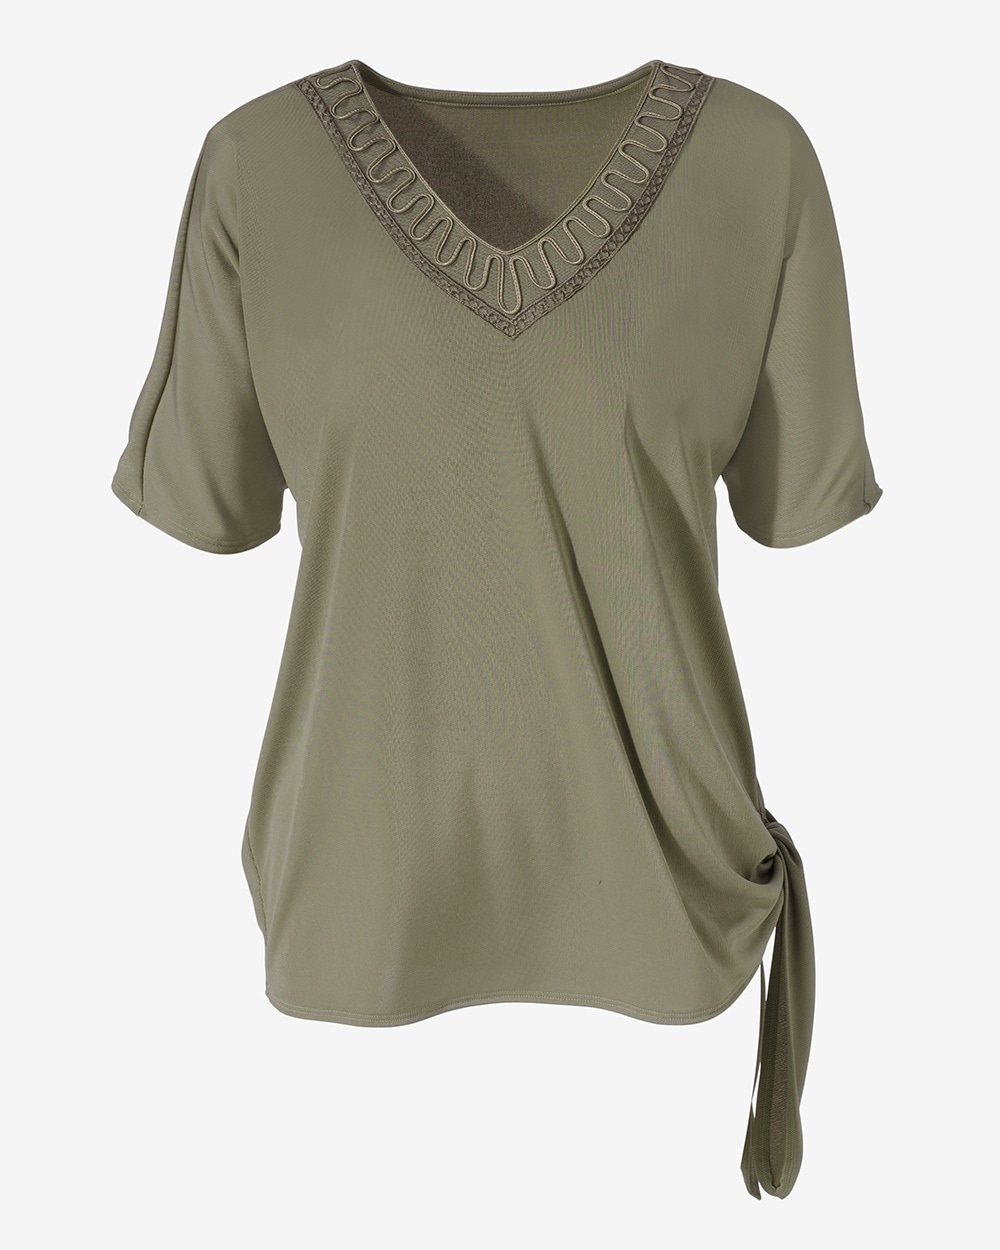 Easywear Tie-Front Embroidered Tee